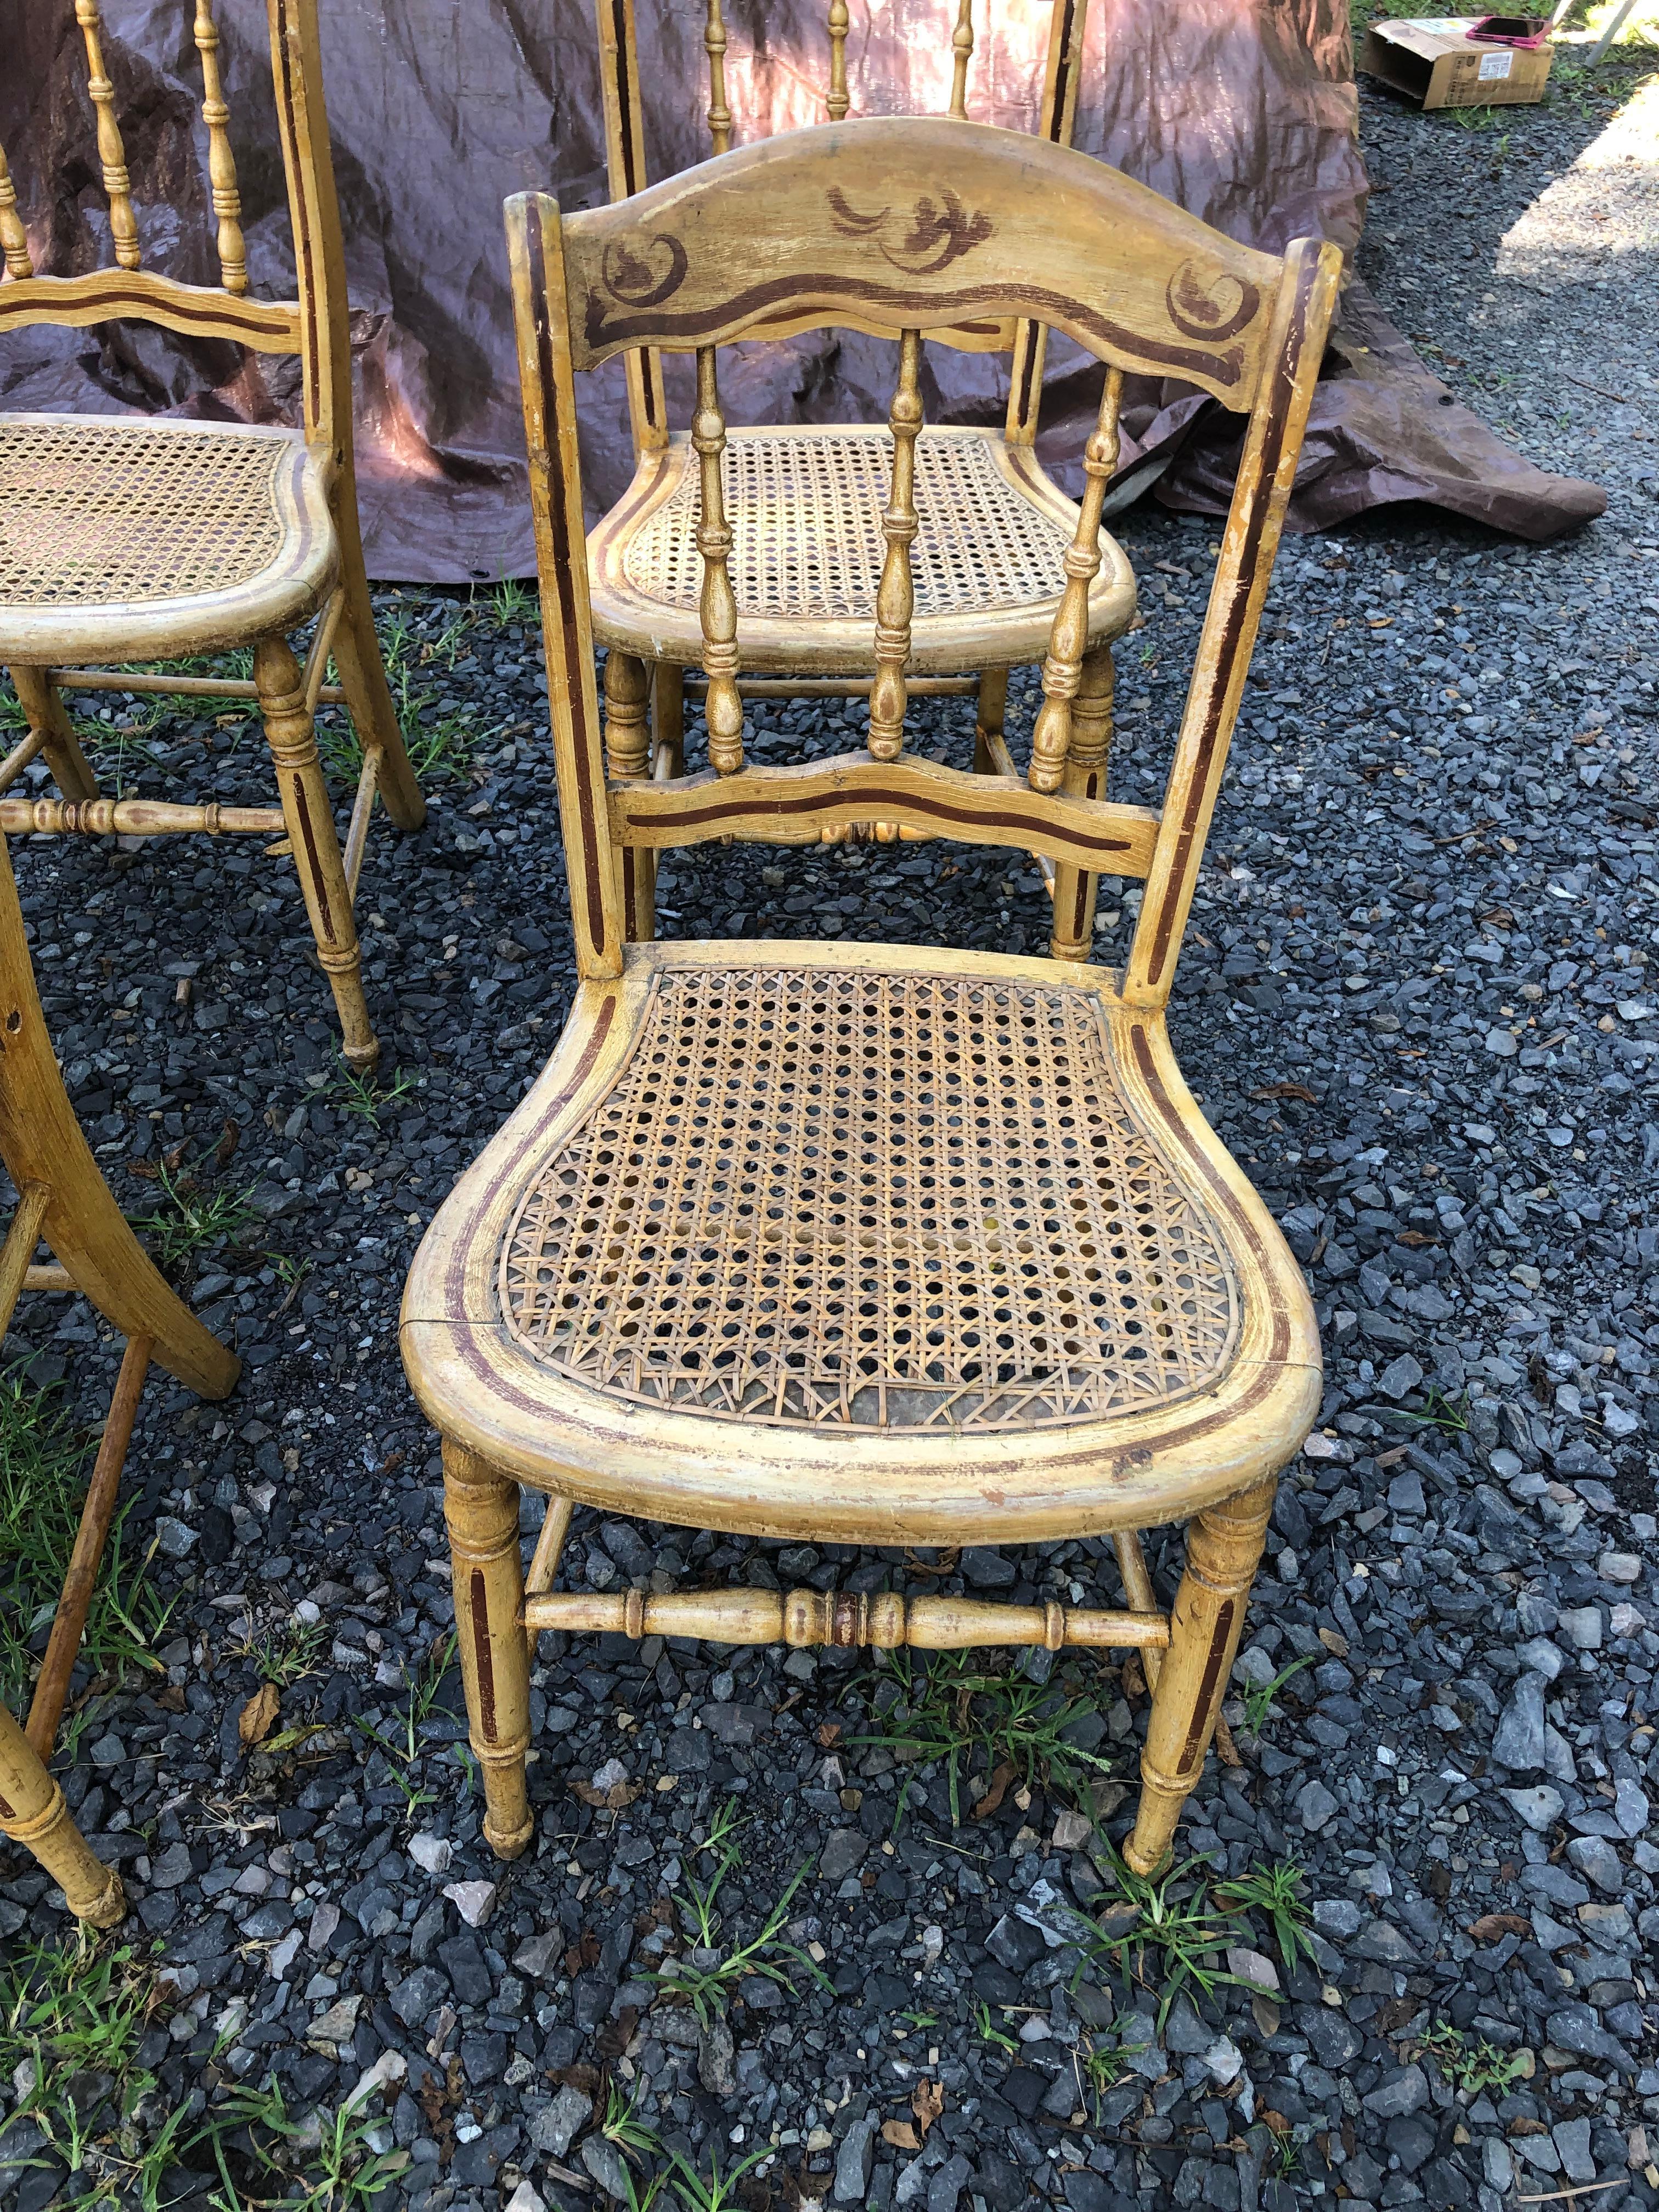 Set of 4 charming Amish made country dining chairs having spindle backs and caned seats with hand painted decoration.  Chairs are in rustic condition, but solid and sturdy.  One seat has visible wear to the caning on the edge.